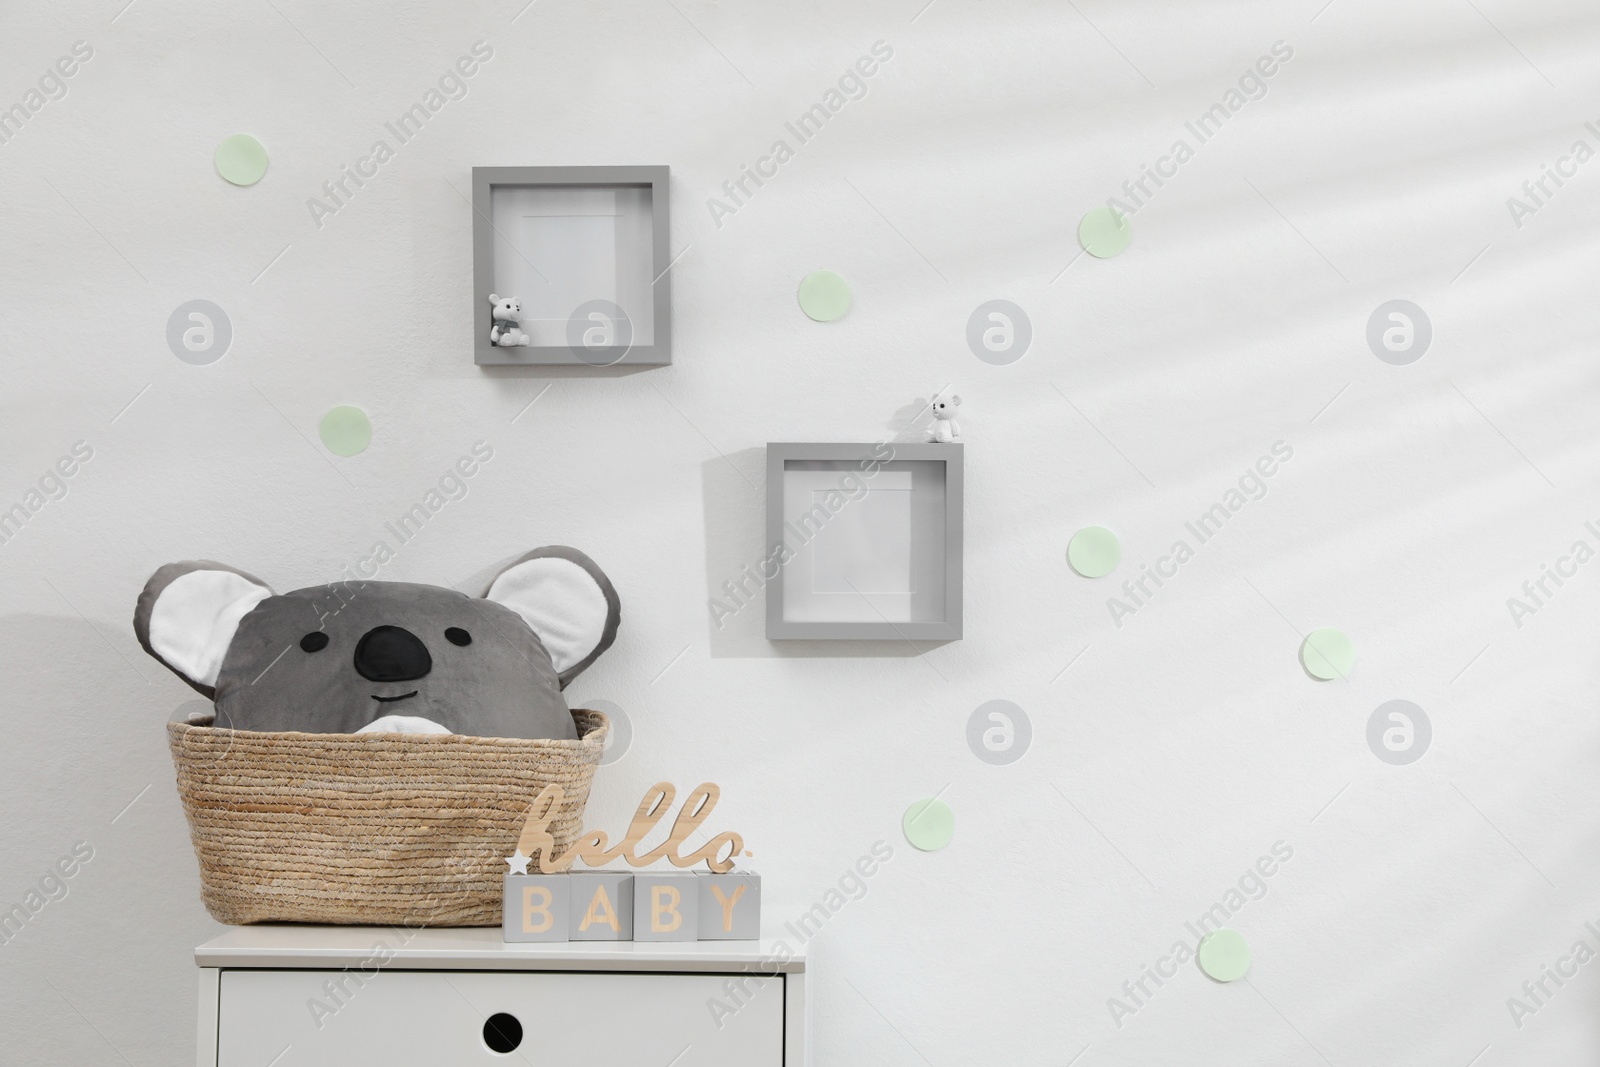 Photo of Wooden cubes and wicker basket on chest of drawers indoors. Children's room interior